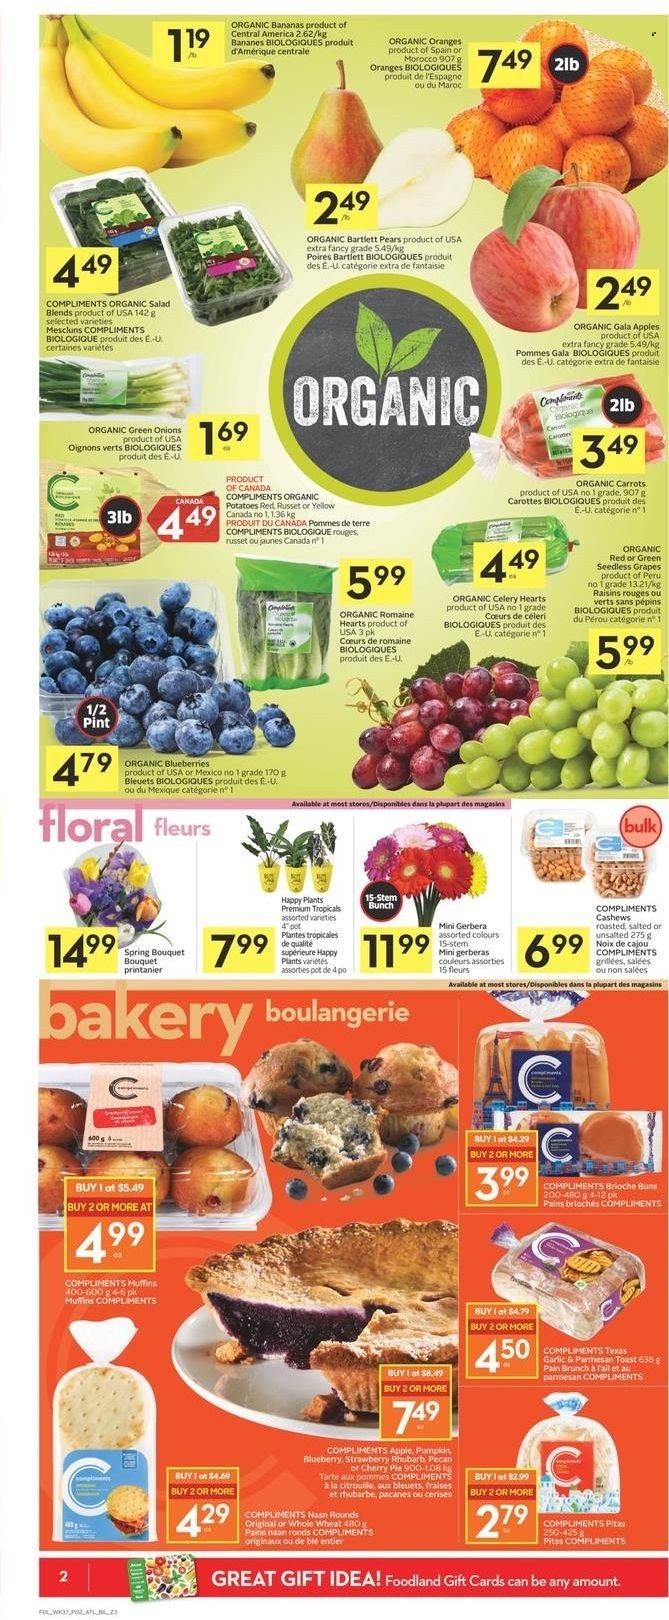 thumbnail - Co-op Flyer - January 06, 2022 - January 12, 2022 - Sales products - pita, pie, buns, brioche, muffin, cherry pie, carrots, celery, russet potatoes, potatoes, salad, green onion, sleeved celery, apples, bananas, Bartlett pears, blueberries, Gala, grapes, seedless grapes, pears, organic bananas, parmesan, cashews, dried fruit, raisins, oranges. Page 2.